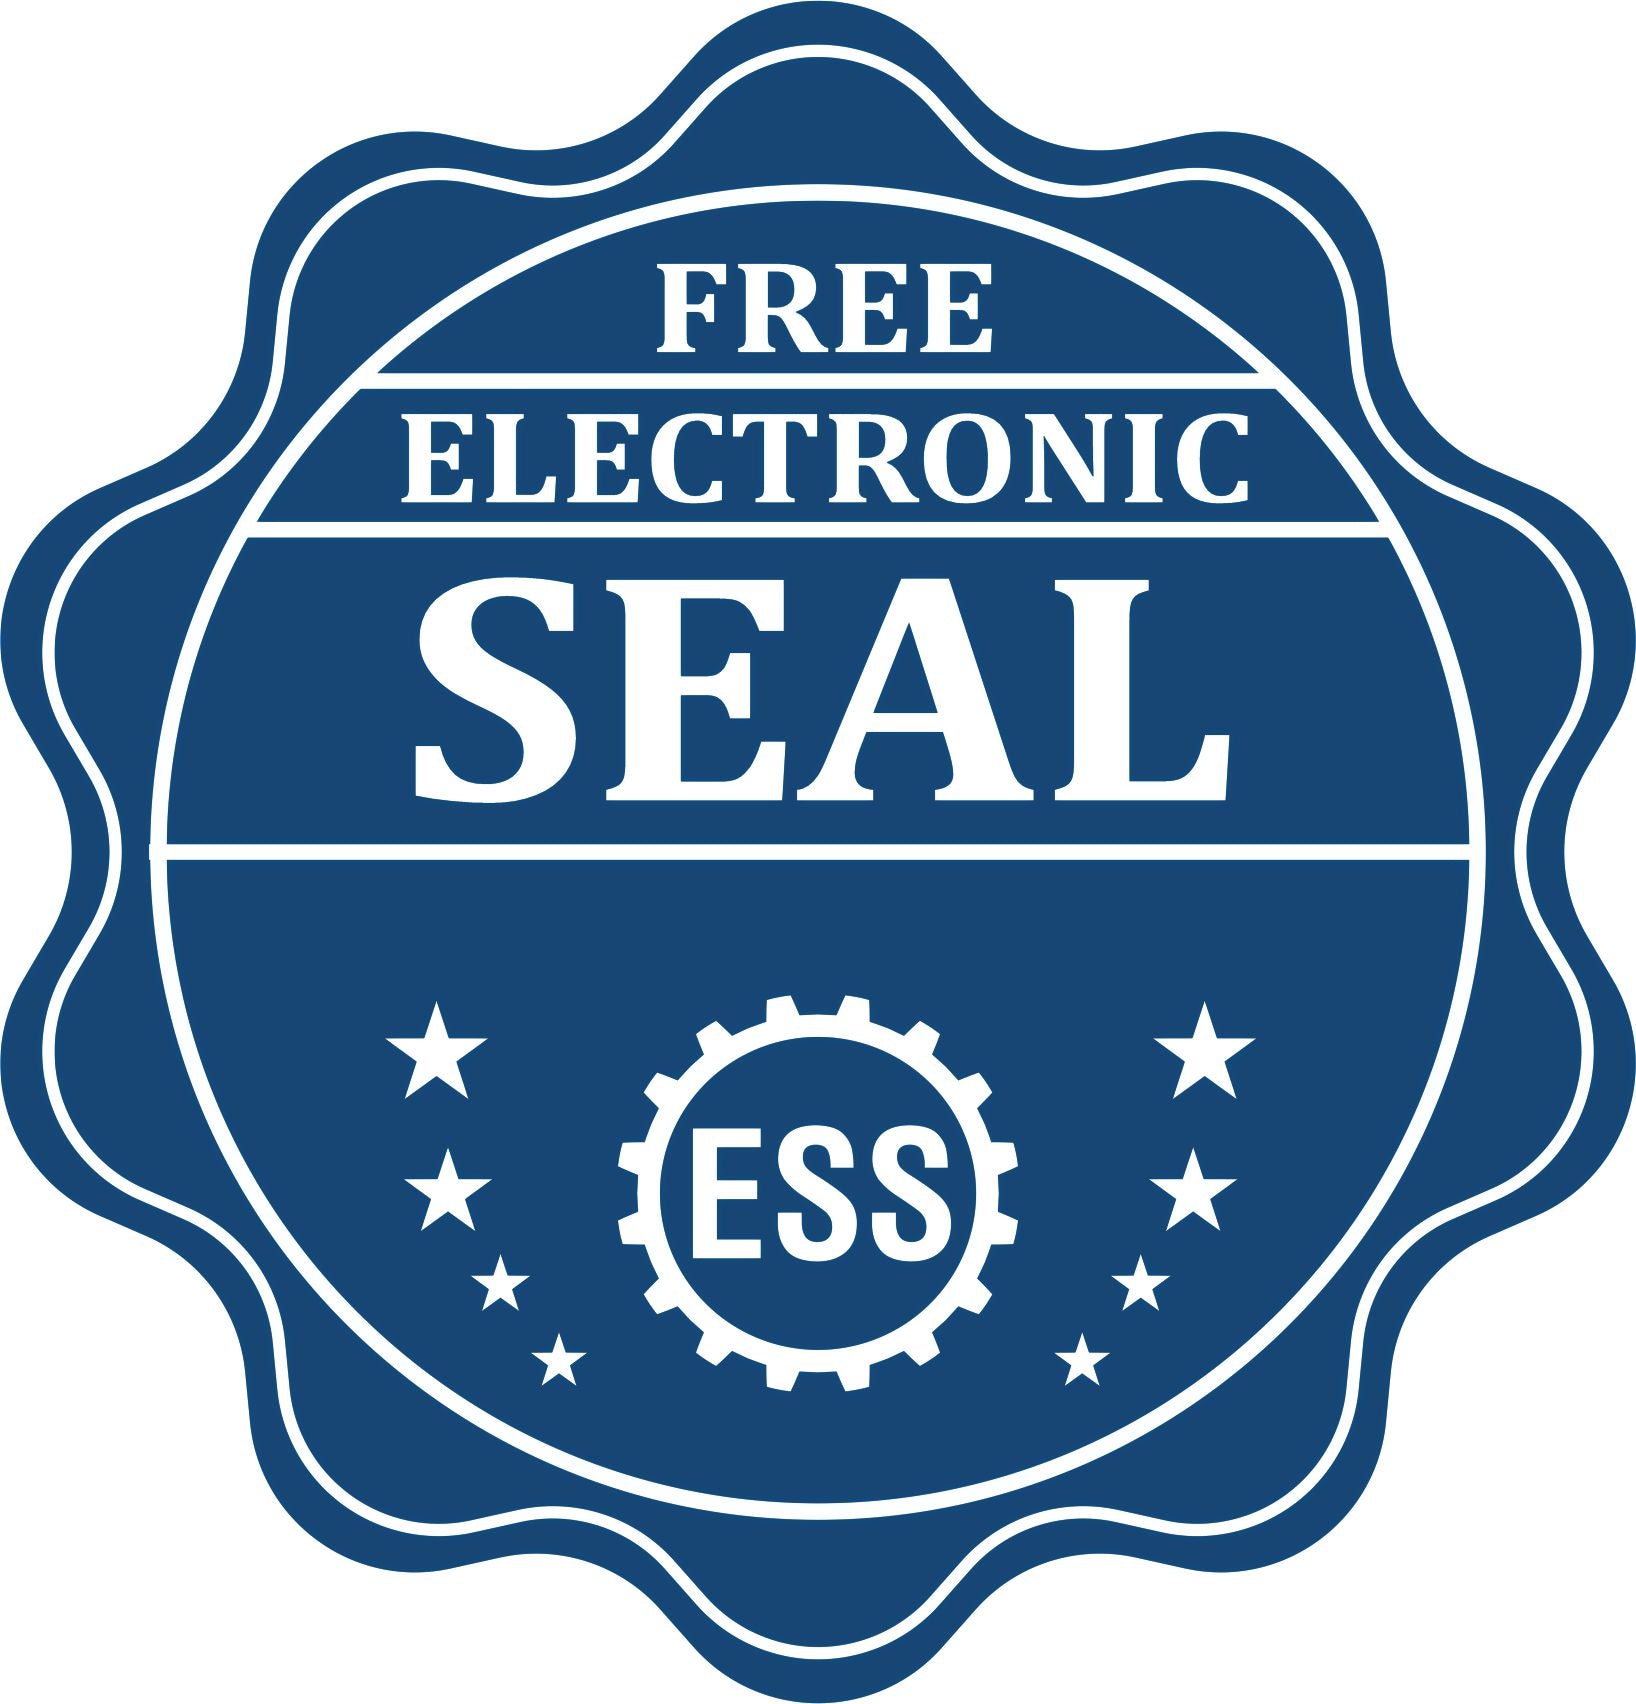 A badge showing a free electronic seal for the Slim Pre-Inked South Dakota Professional Geologist Seal Stamp with stars and the ESS gear on the emblem.